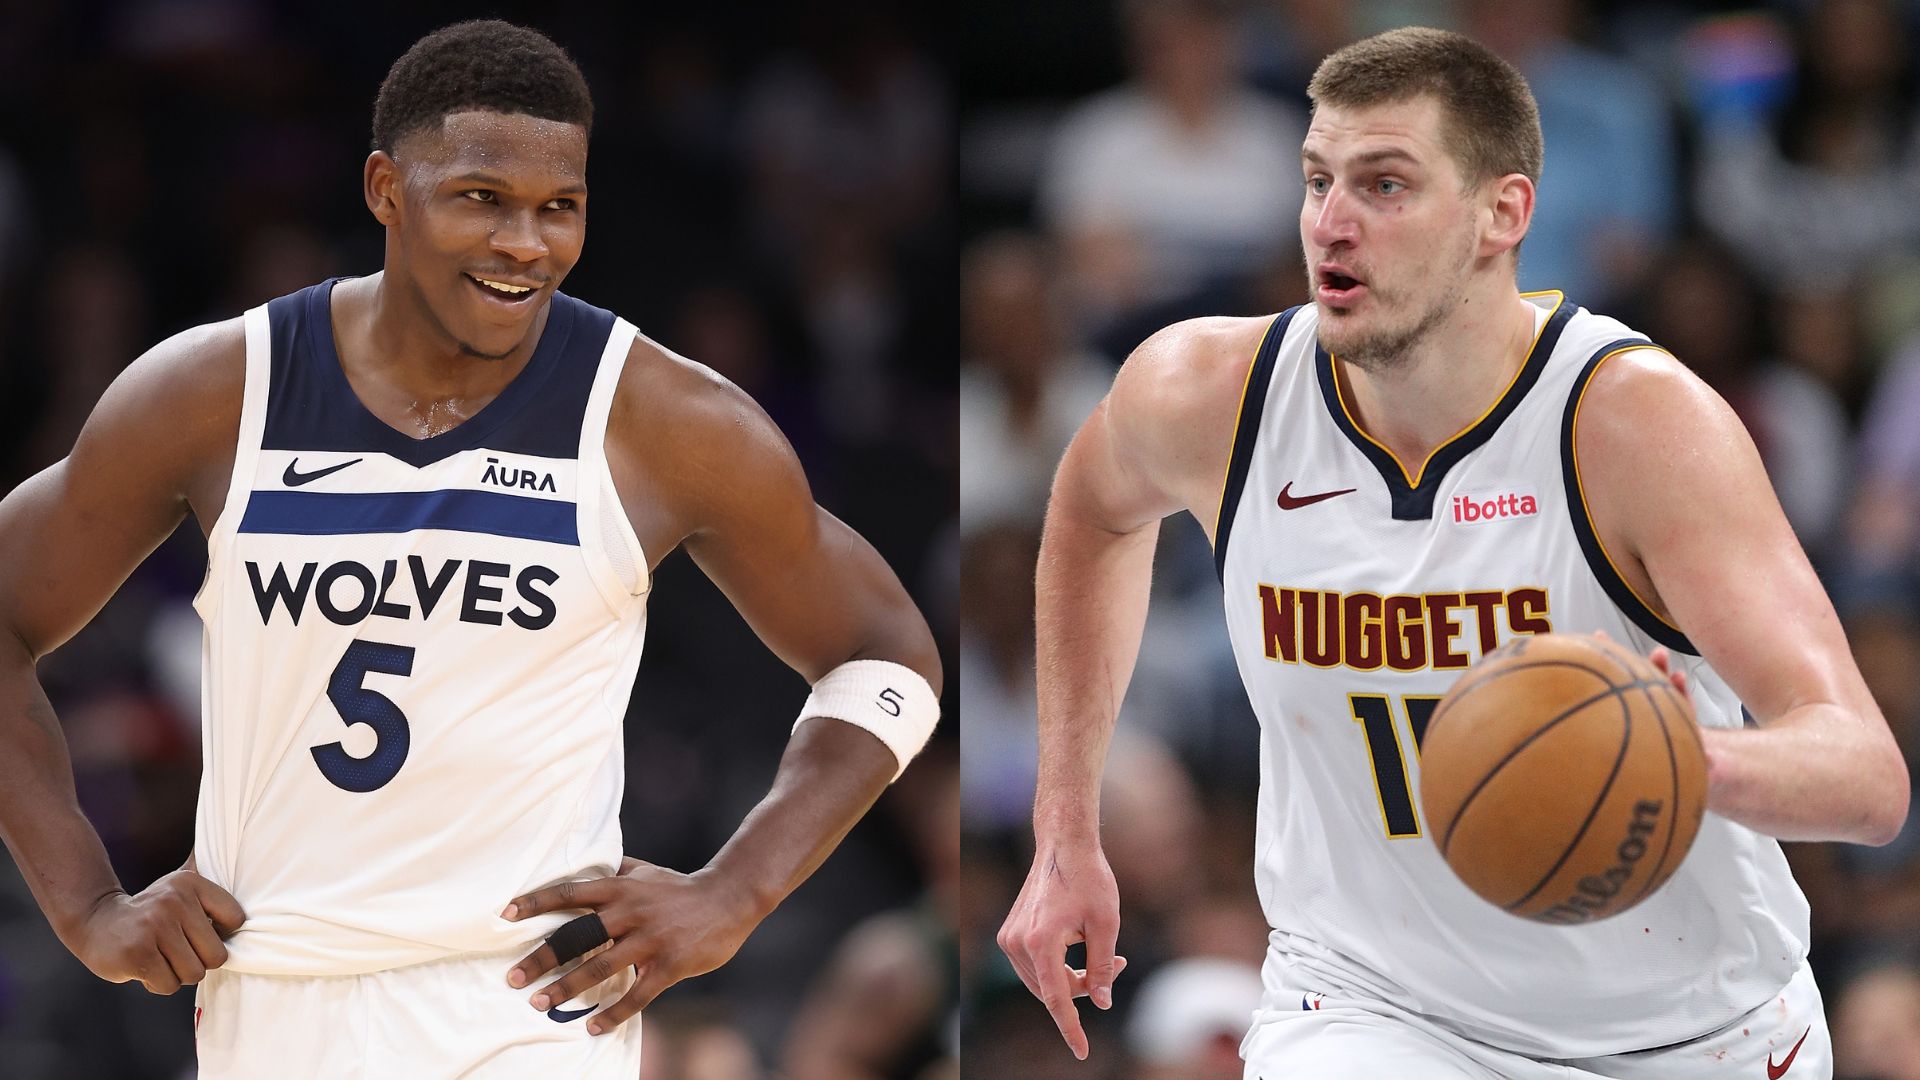 PHOENIX, ARIZONA - APRIL 26: Anthony Edwards #5 of the Minnesota Timberwolves by Christian Petersen/Getty Images | MEMPHIS, TENNESSEE - APRIL 14: Nikola Jokic #15 of the Denver Nuggets by Justin Ford/Getty Images